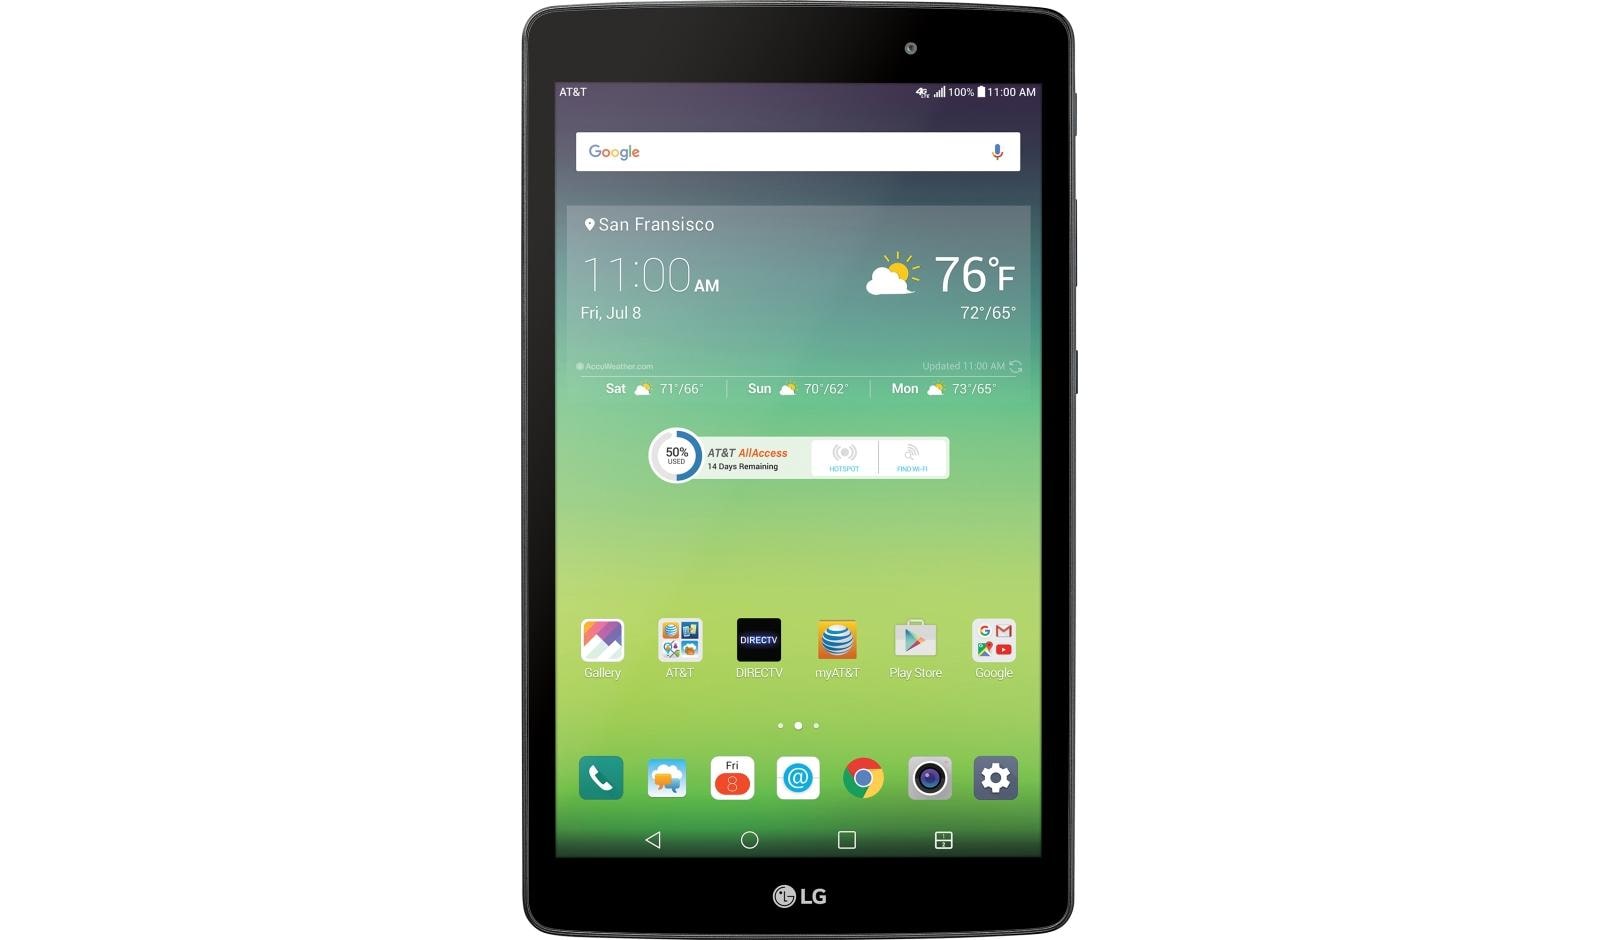 Restored LG G Pad X V520 8in 32GB Blue Android Tablet (AT&T) Grade A (Refurbished) - image 2 of 6